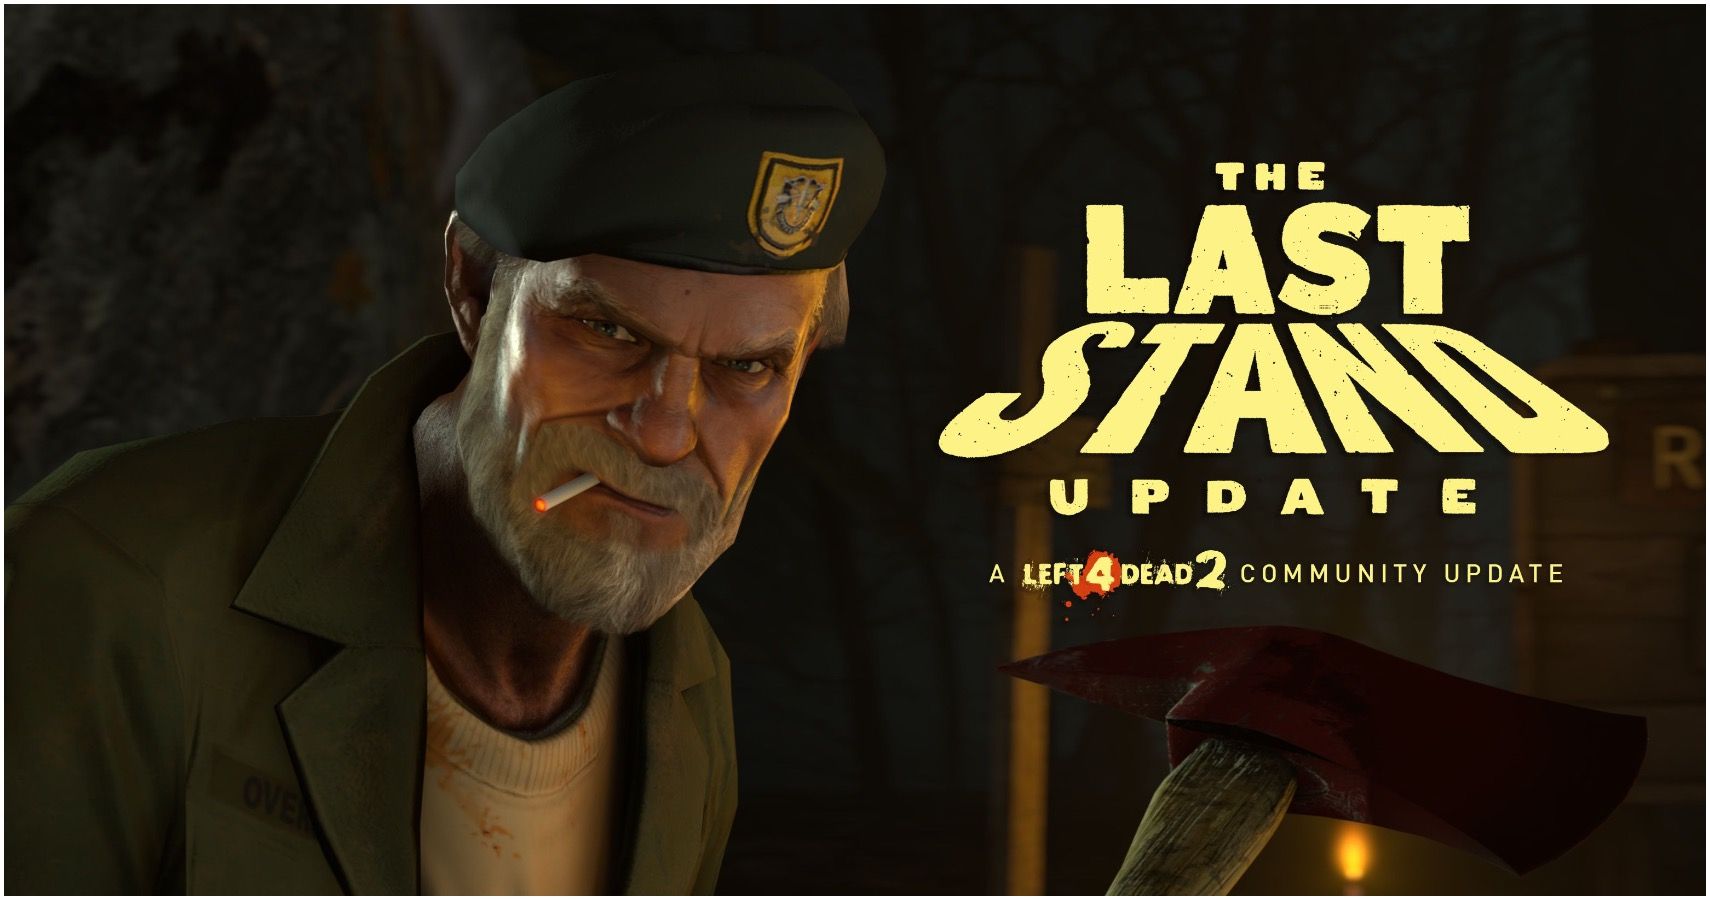 The promotional material for the Last Stand update